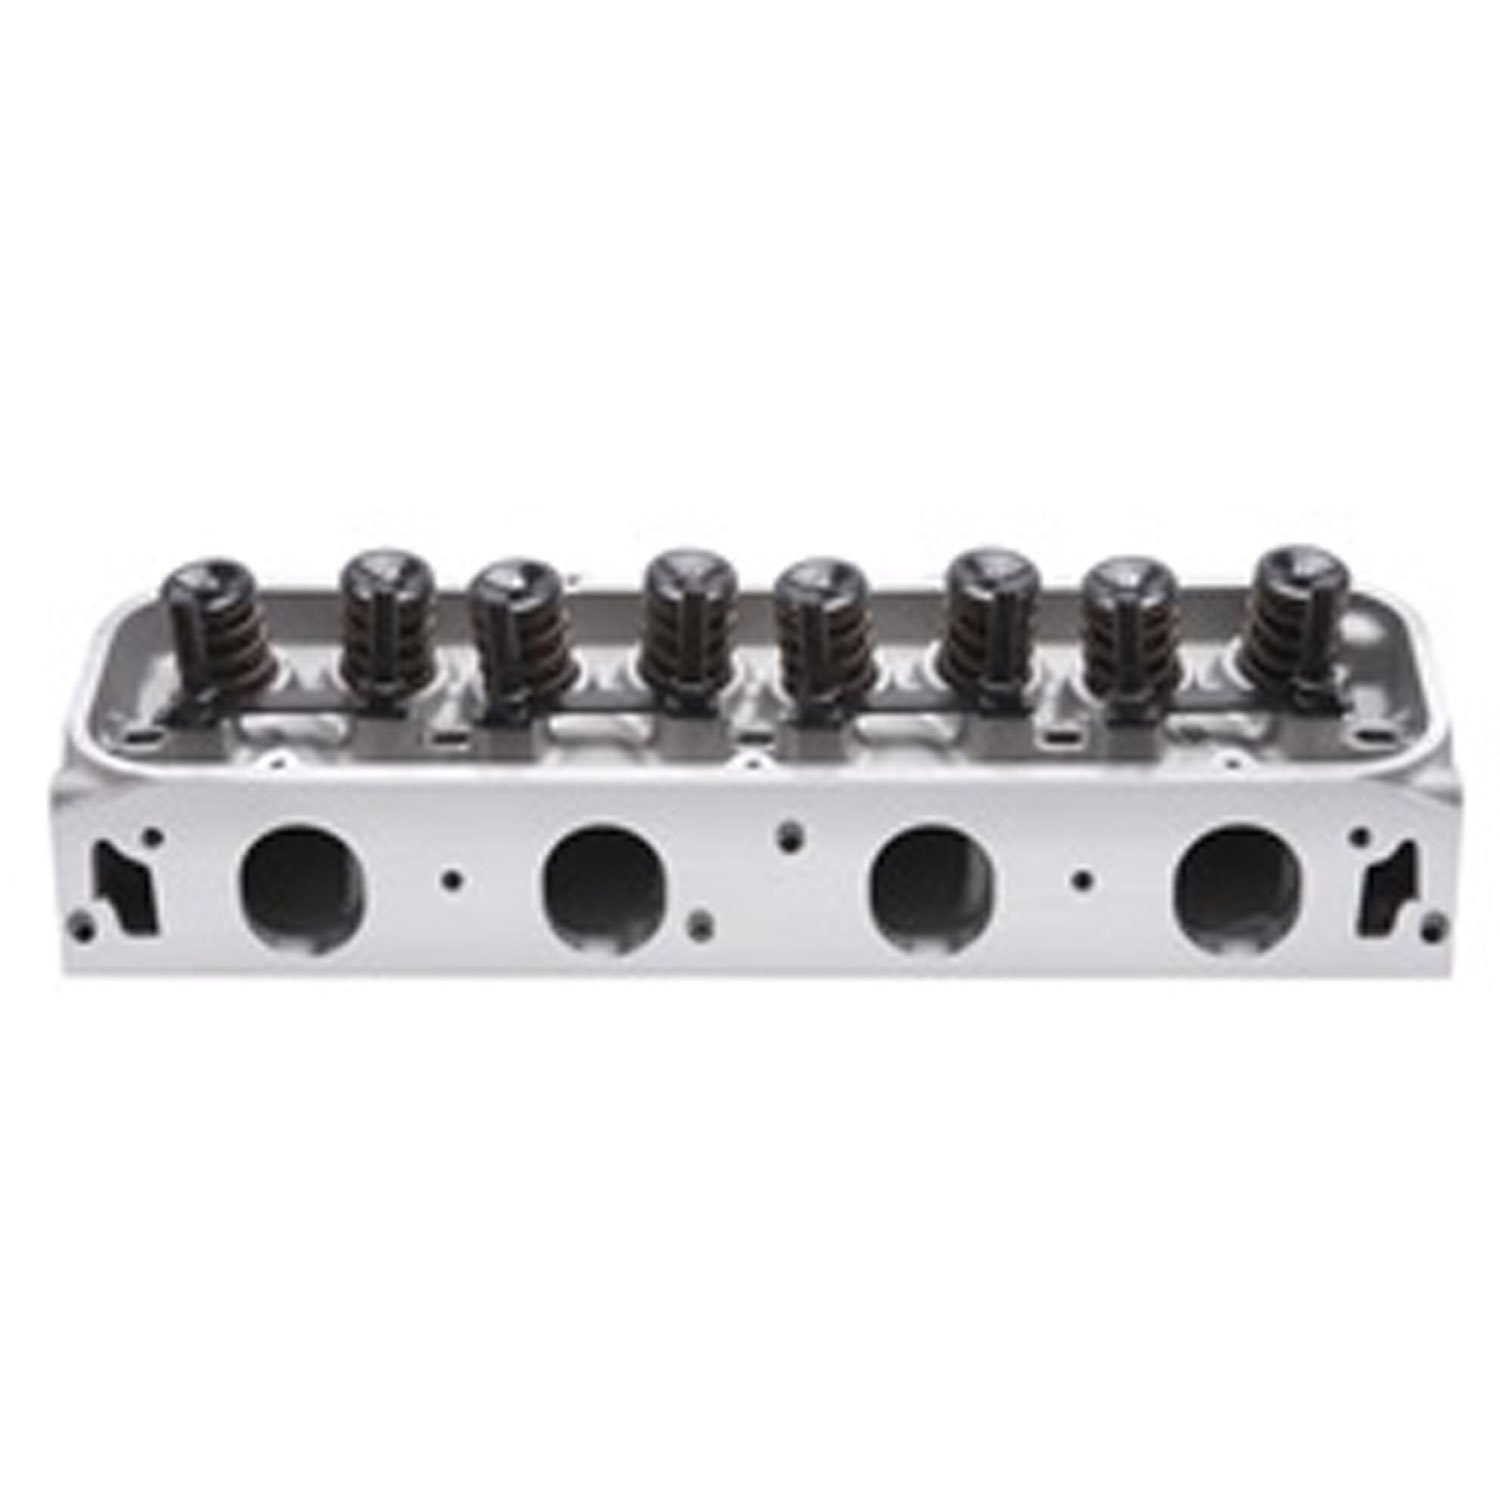 60675 Performer RPM 460 Cylinder Head for Big Block Ford